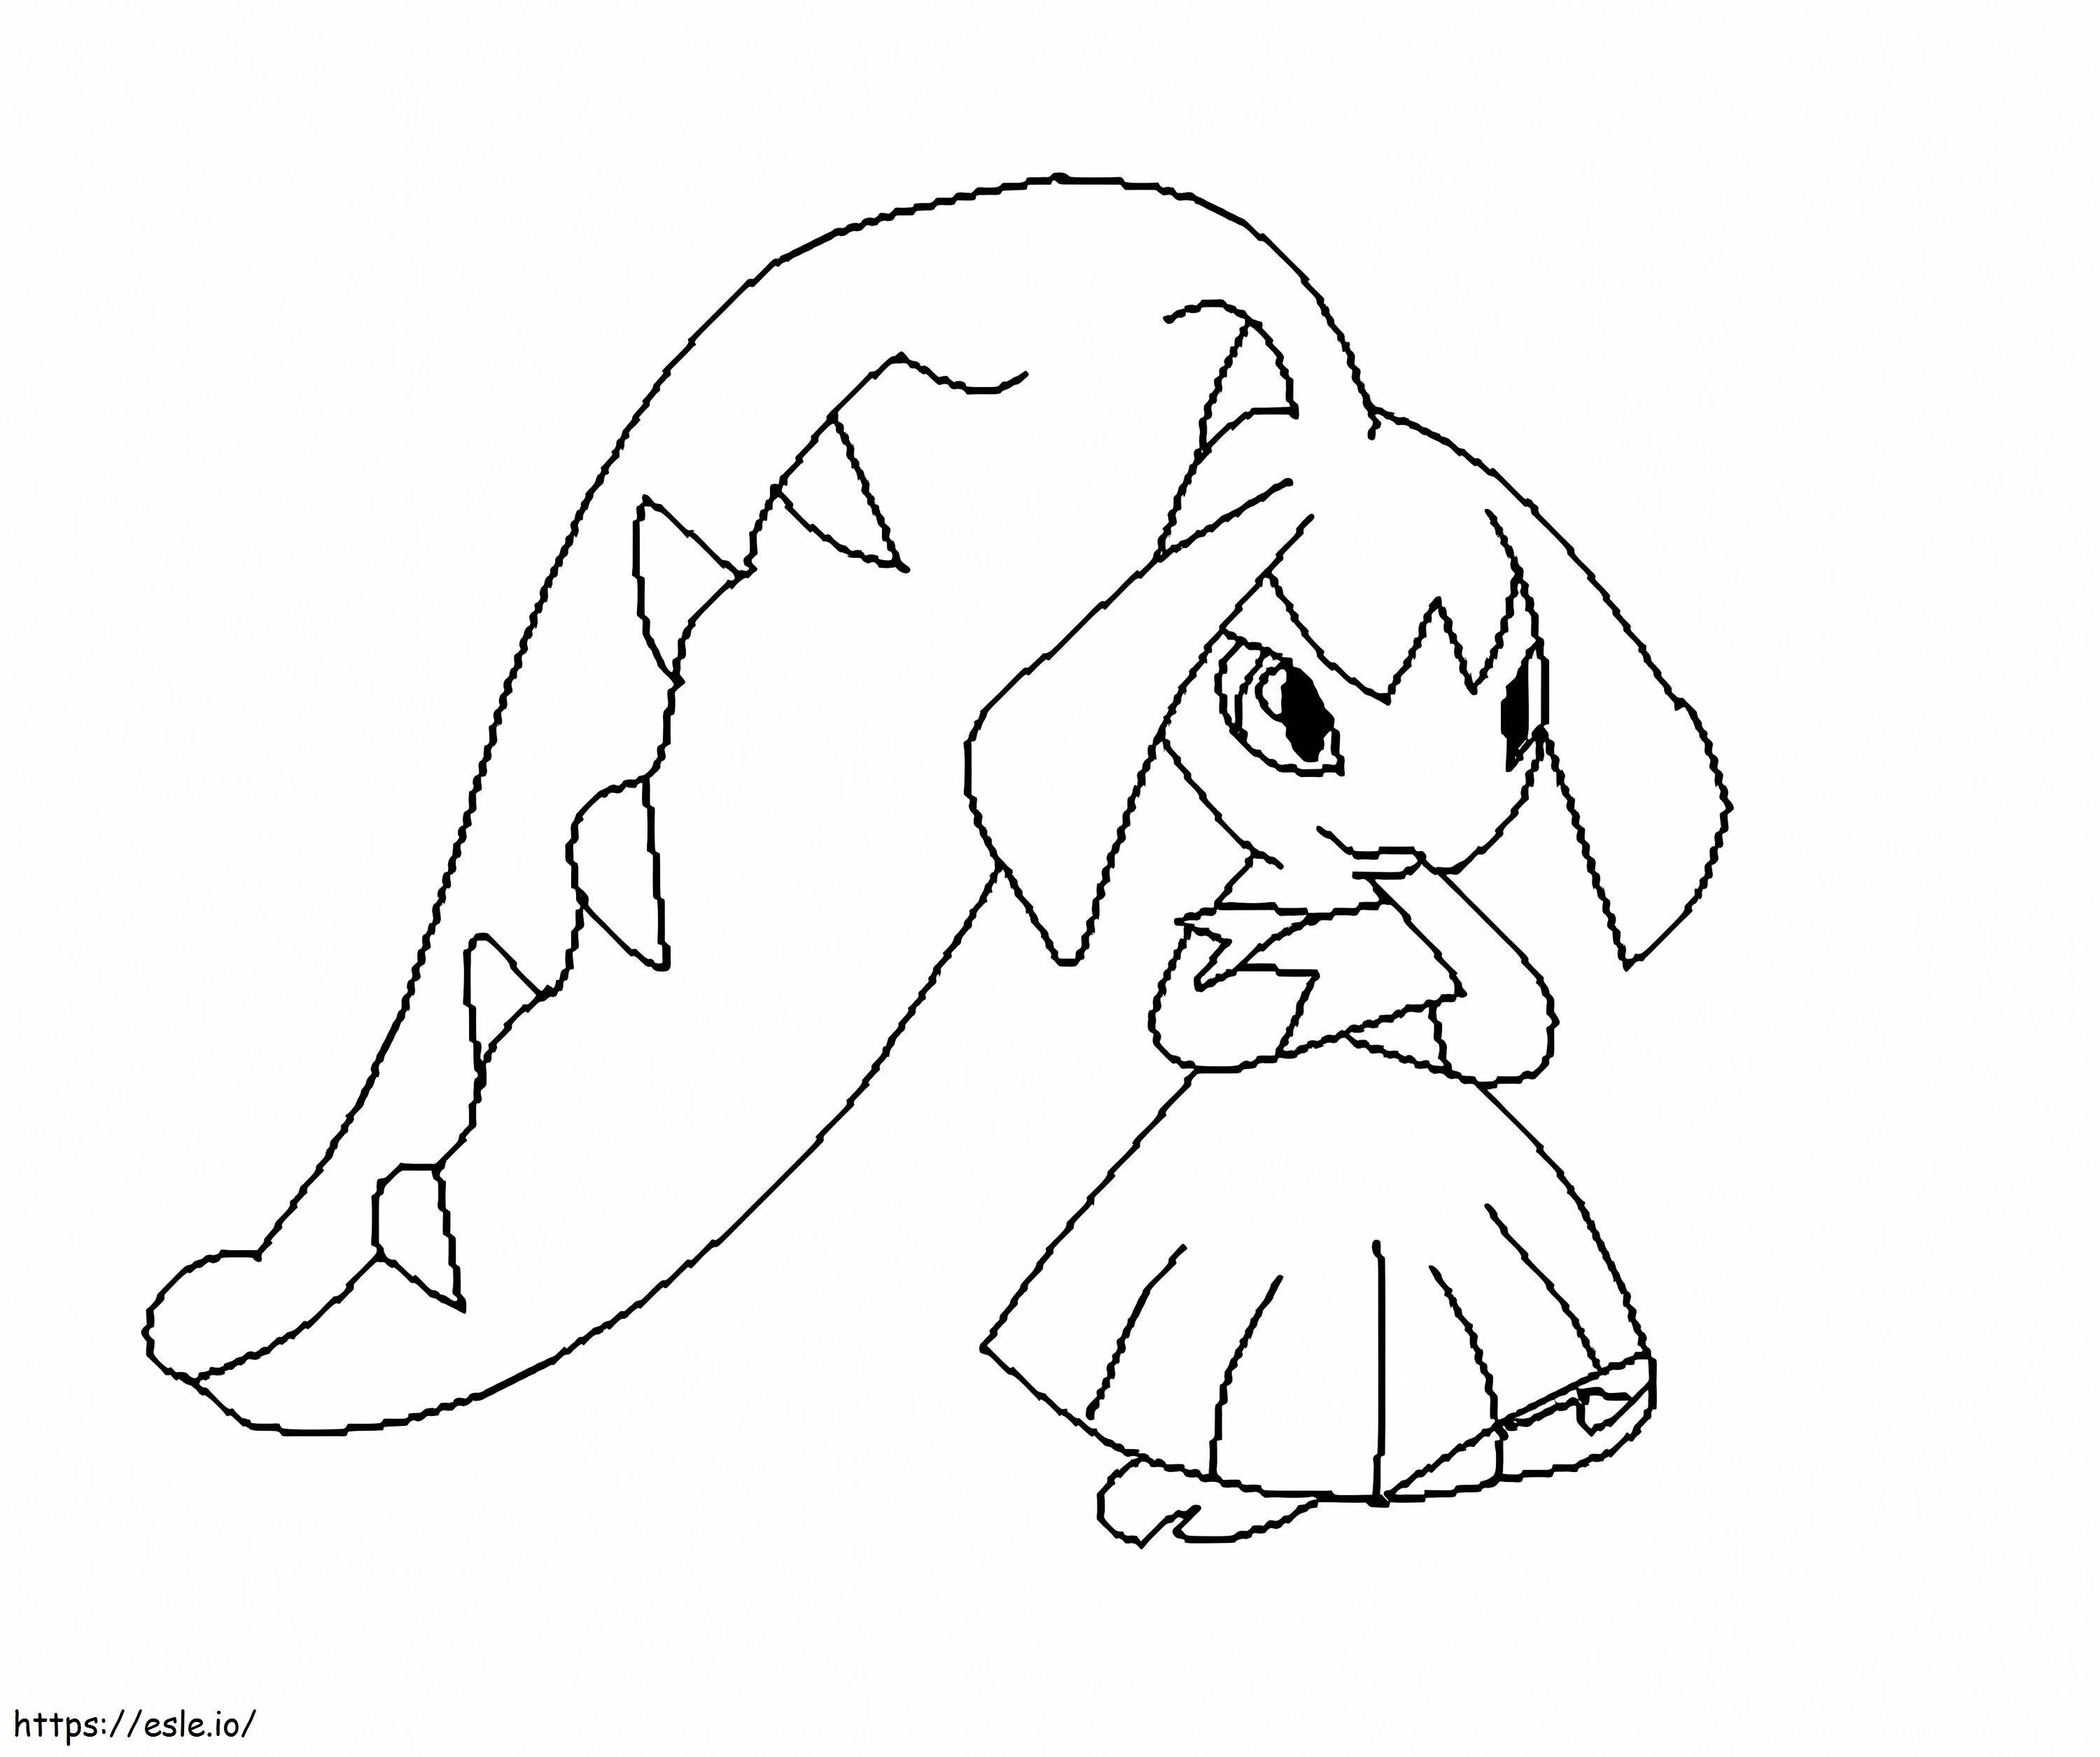 Mawile Pokemon 1 coloring page